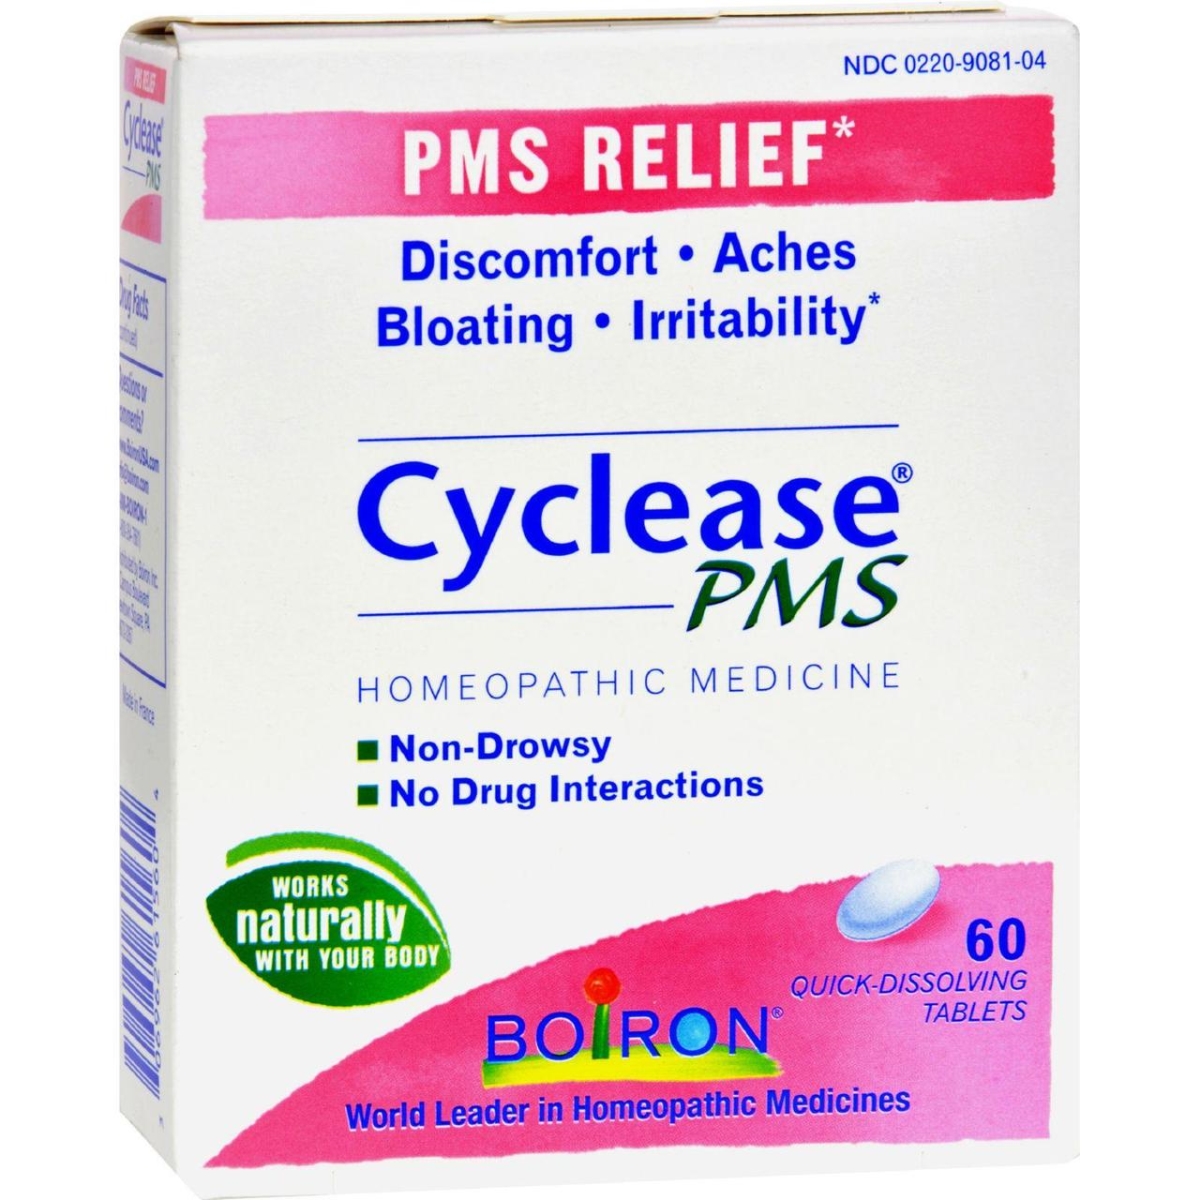 Hg0270116 Cyclease Pms - 60 Tablets